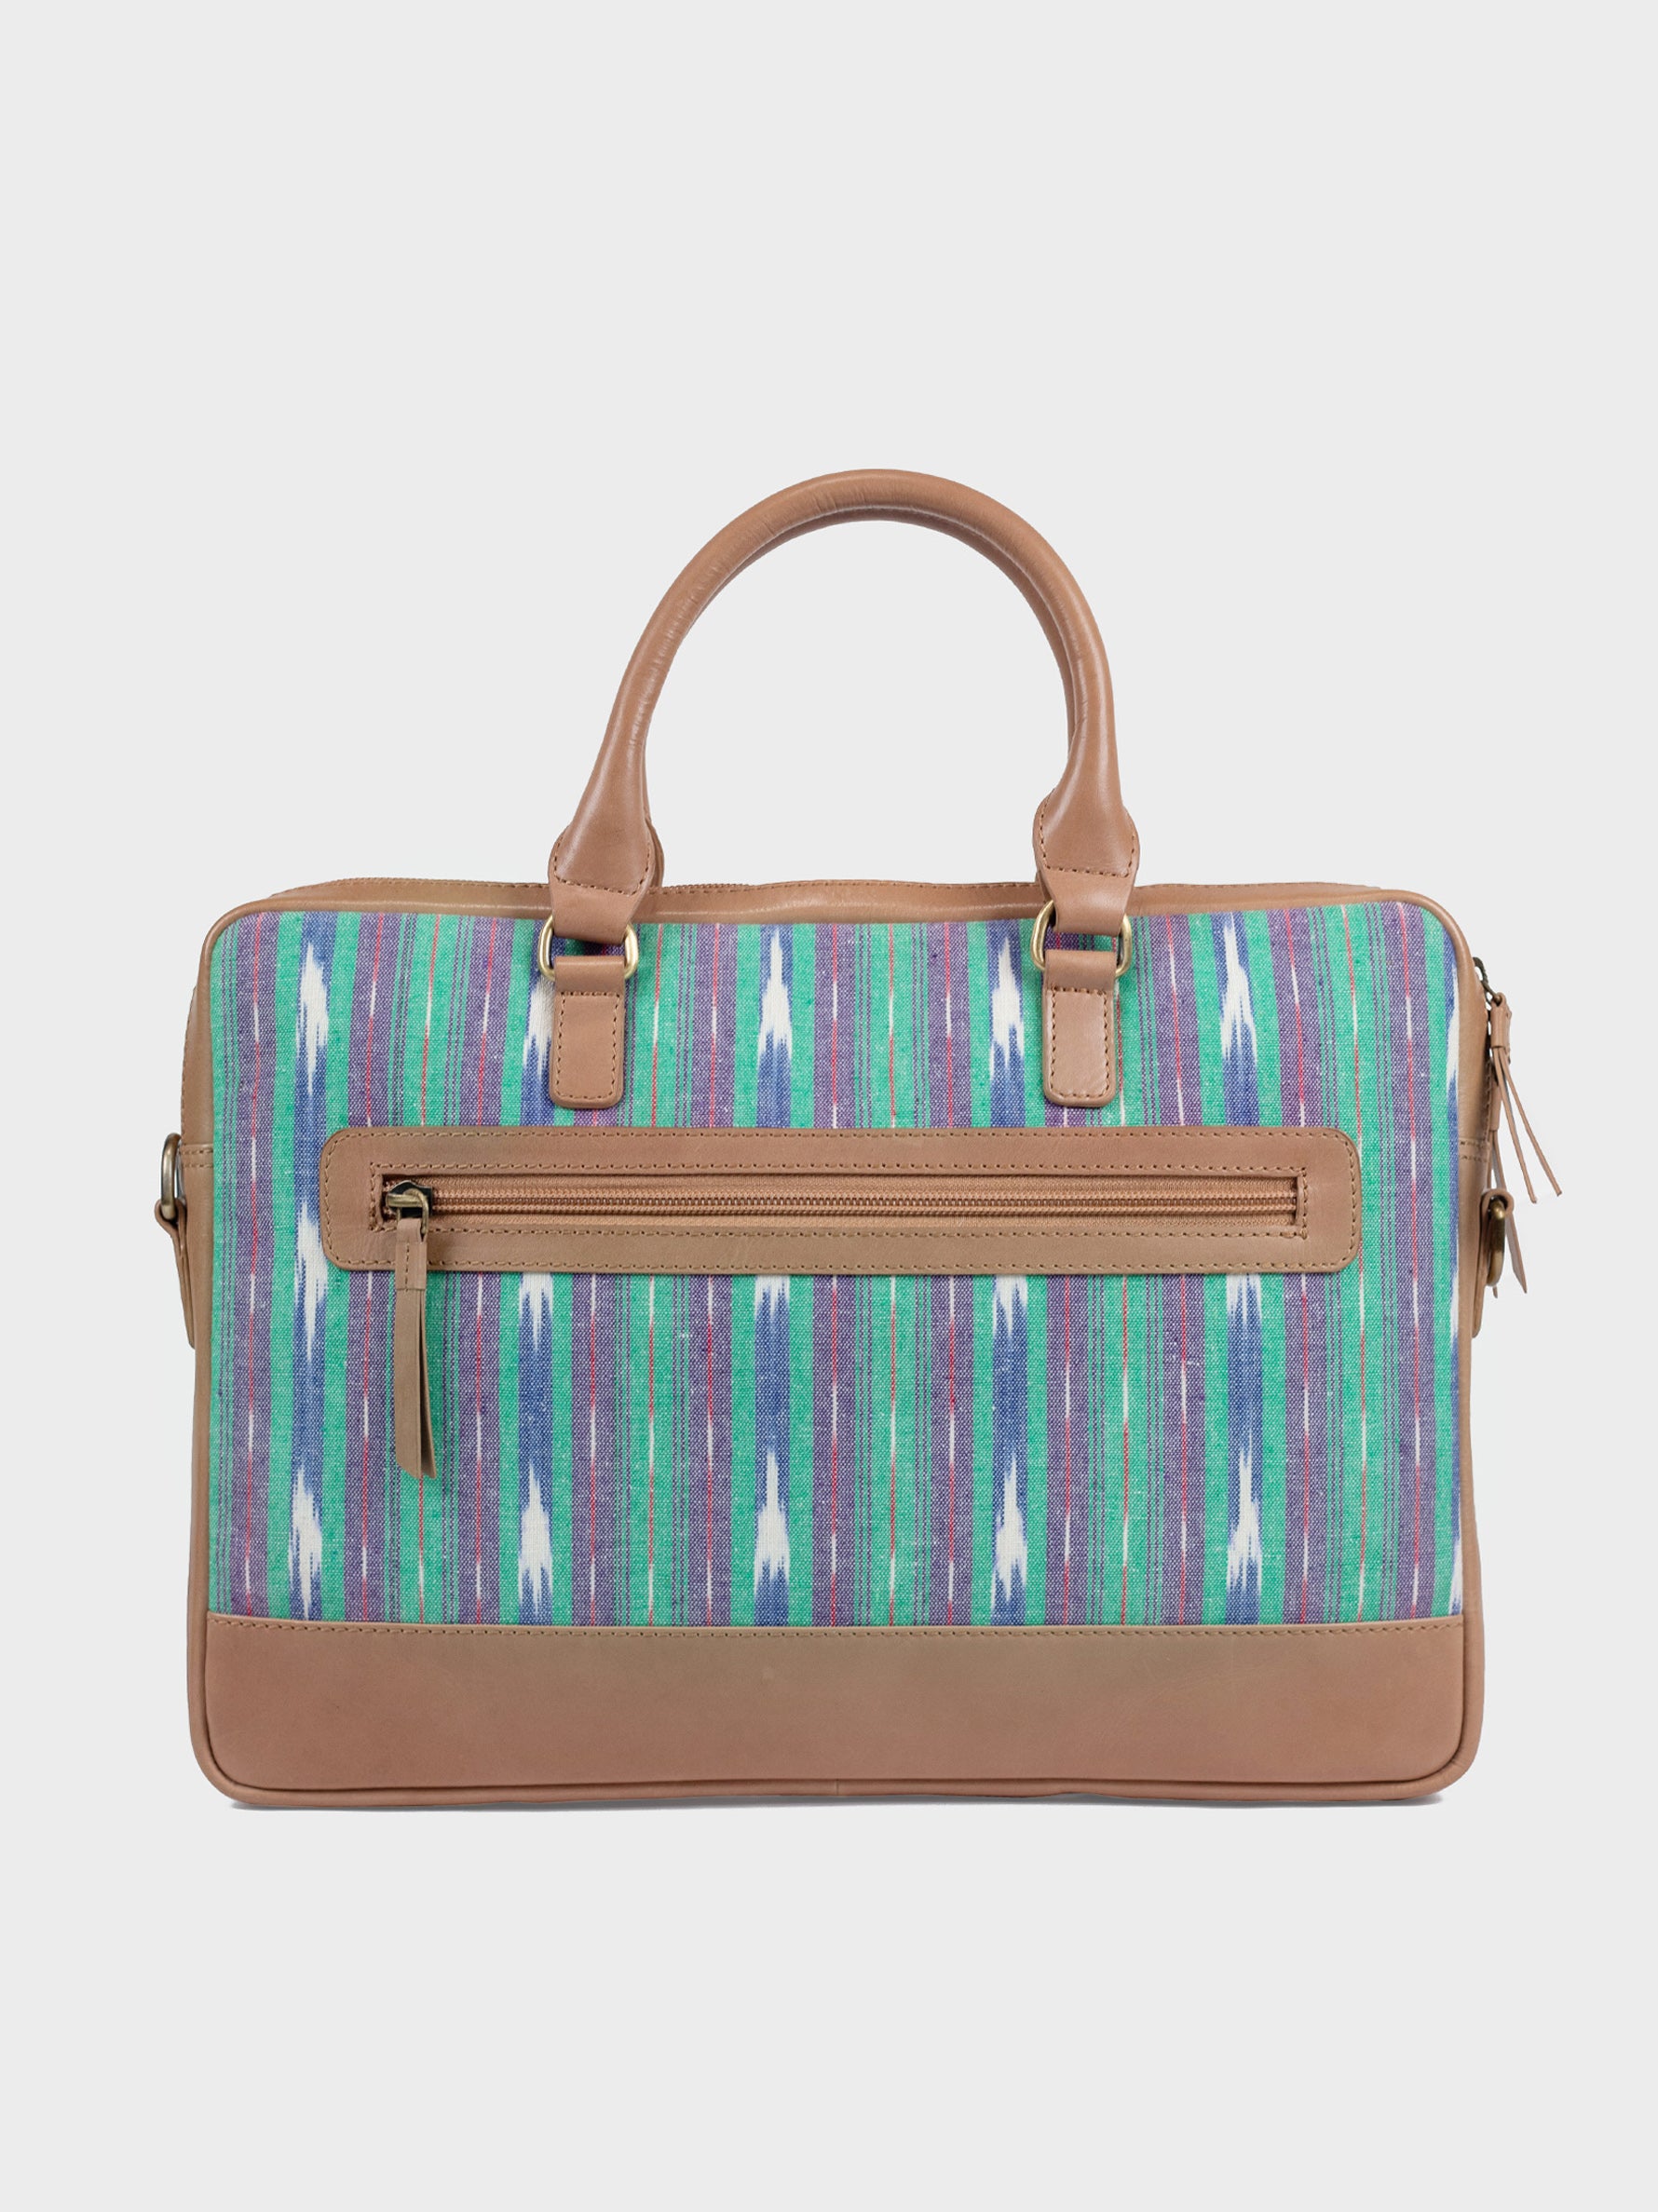 Handcrafted Premium Vegetable Tanned Leather & Ikat Teal Blue Laptop Bag for Women Tan & Loom